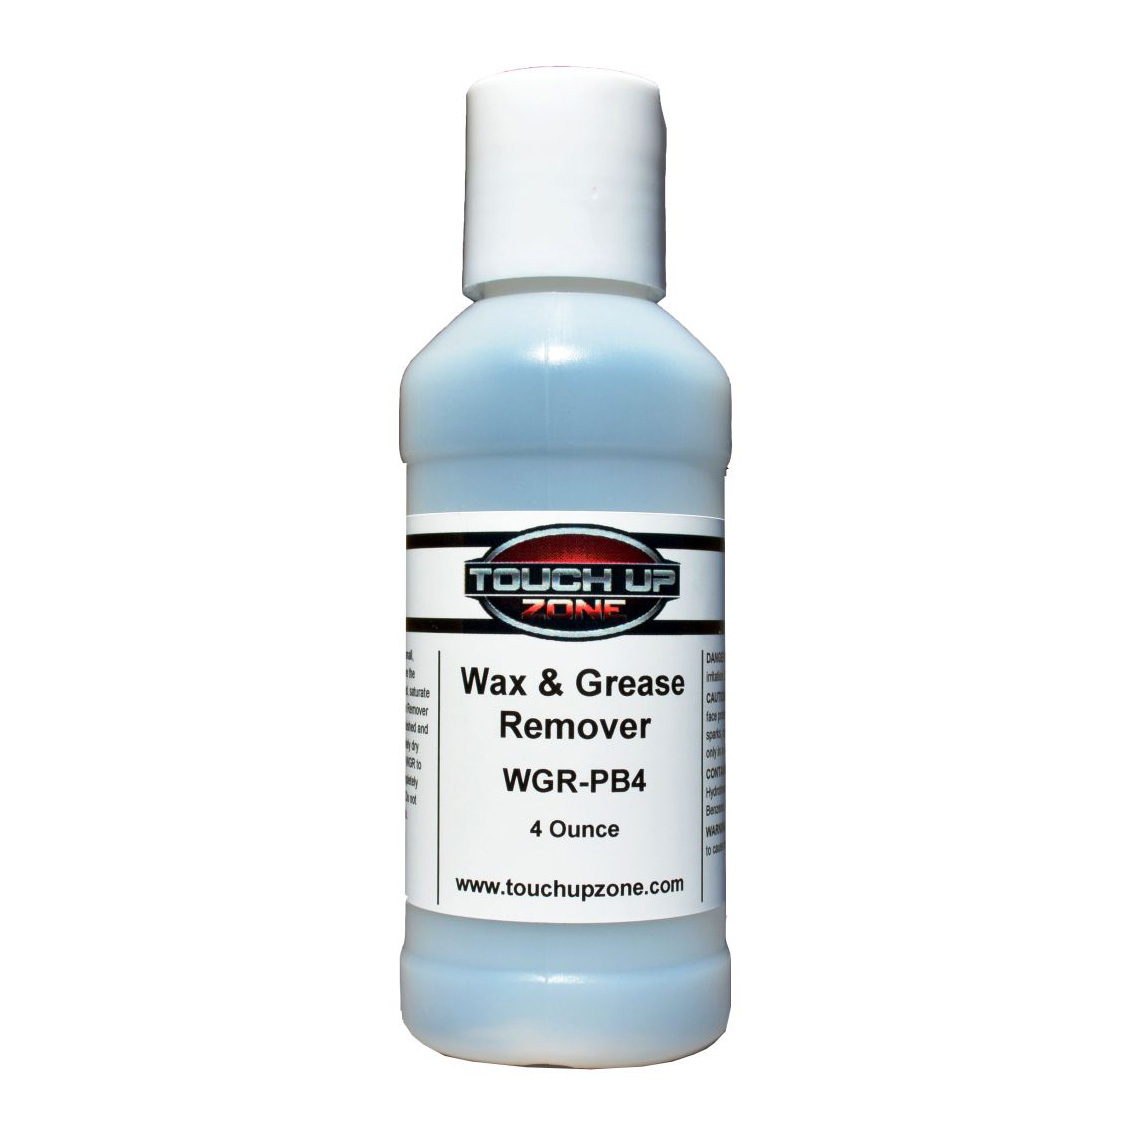 Wax & Grease Remover (4 Ounce Bottle)